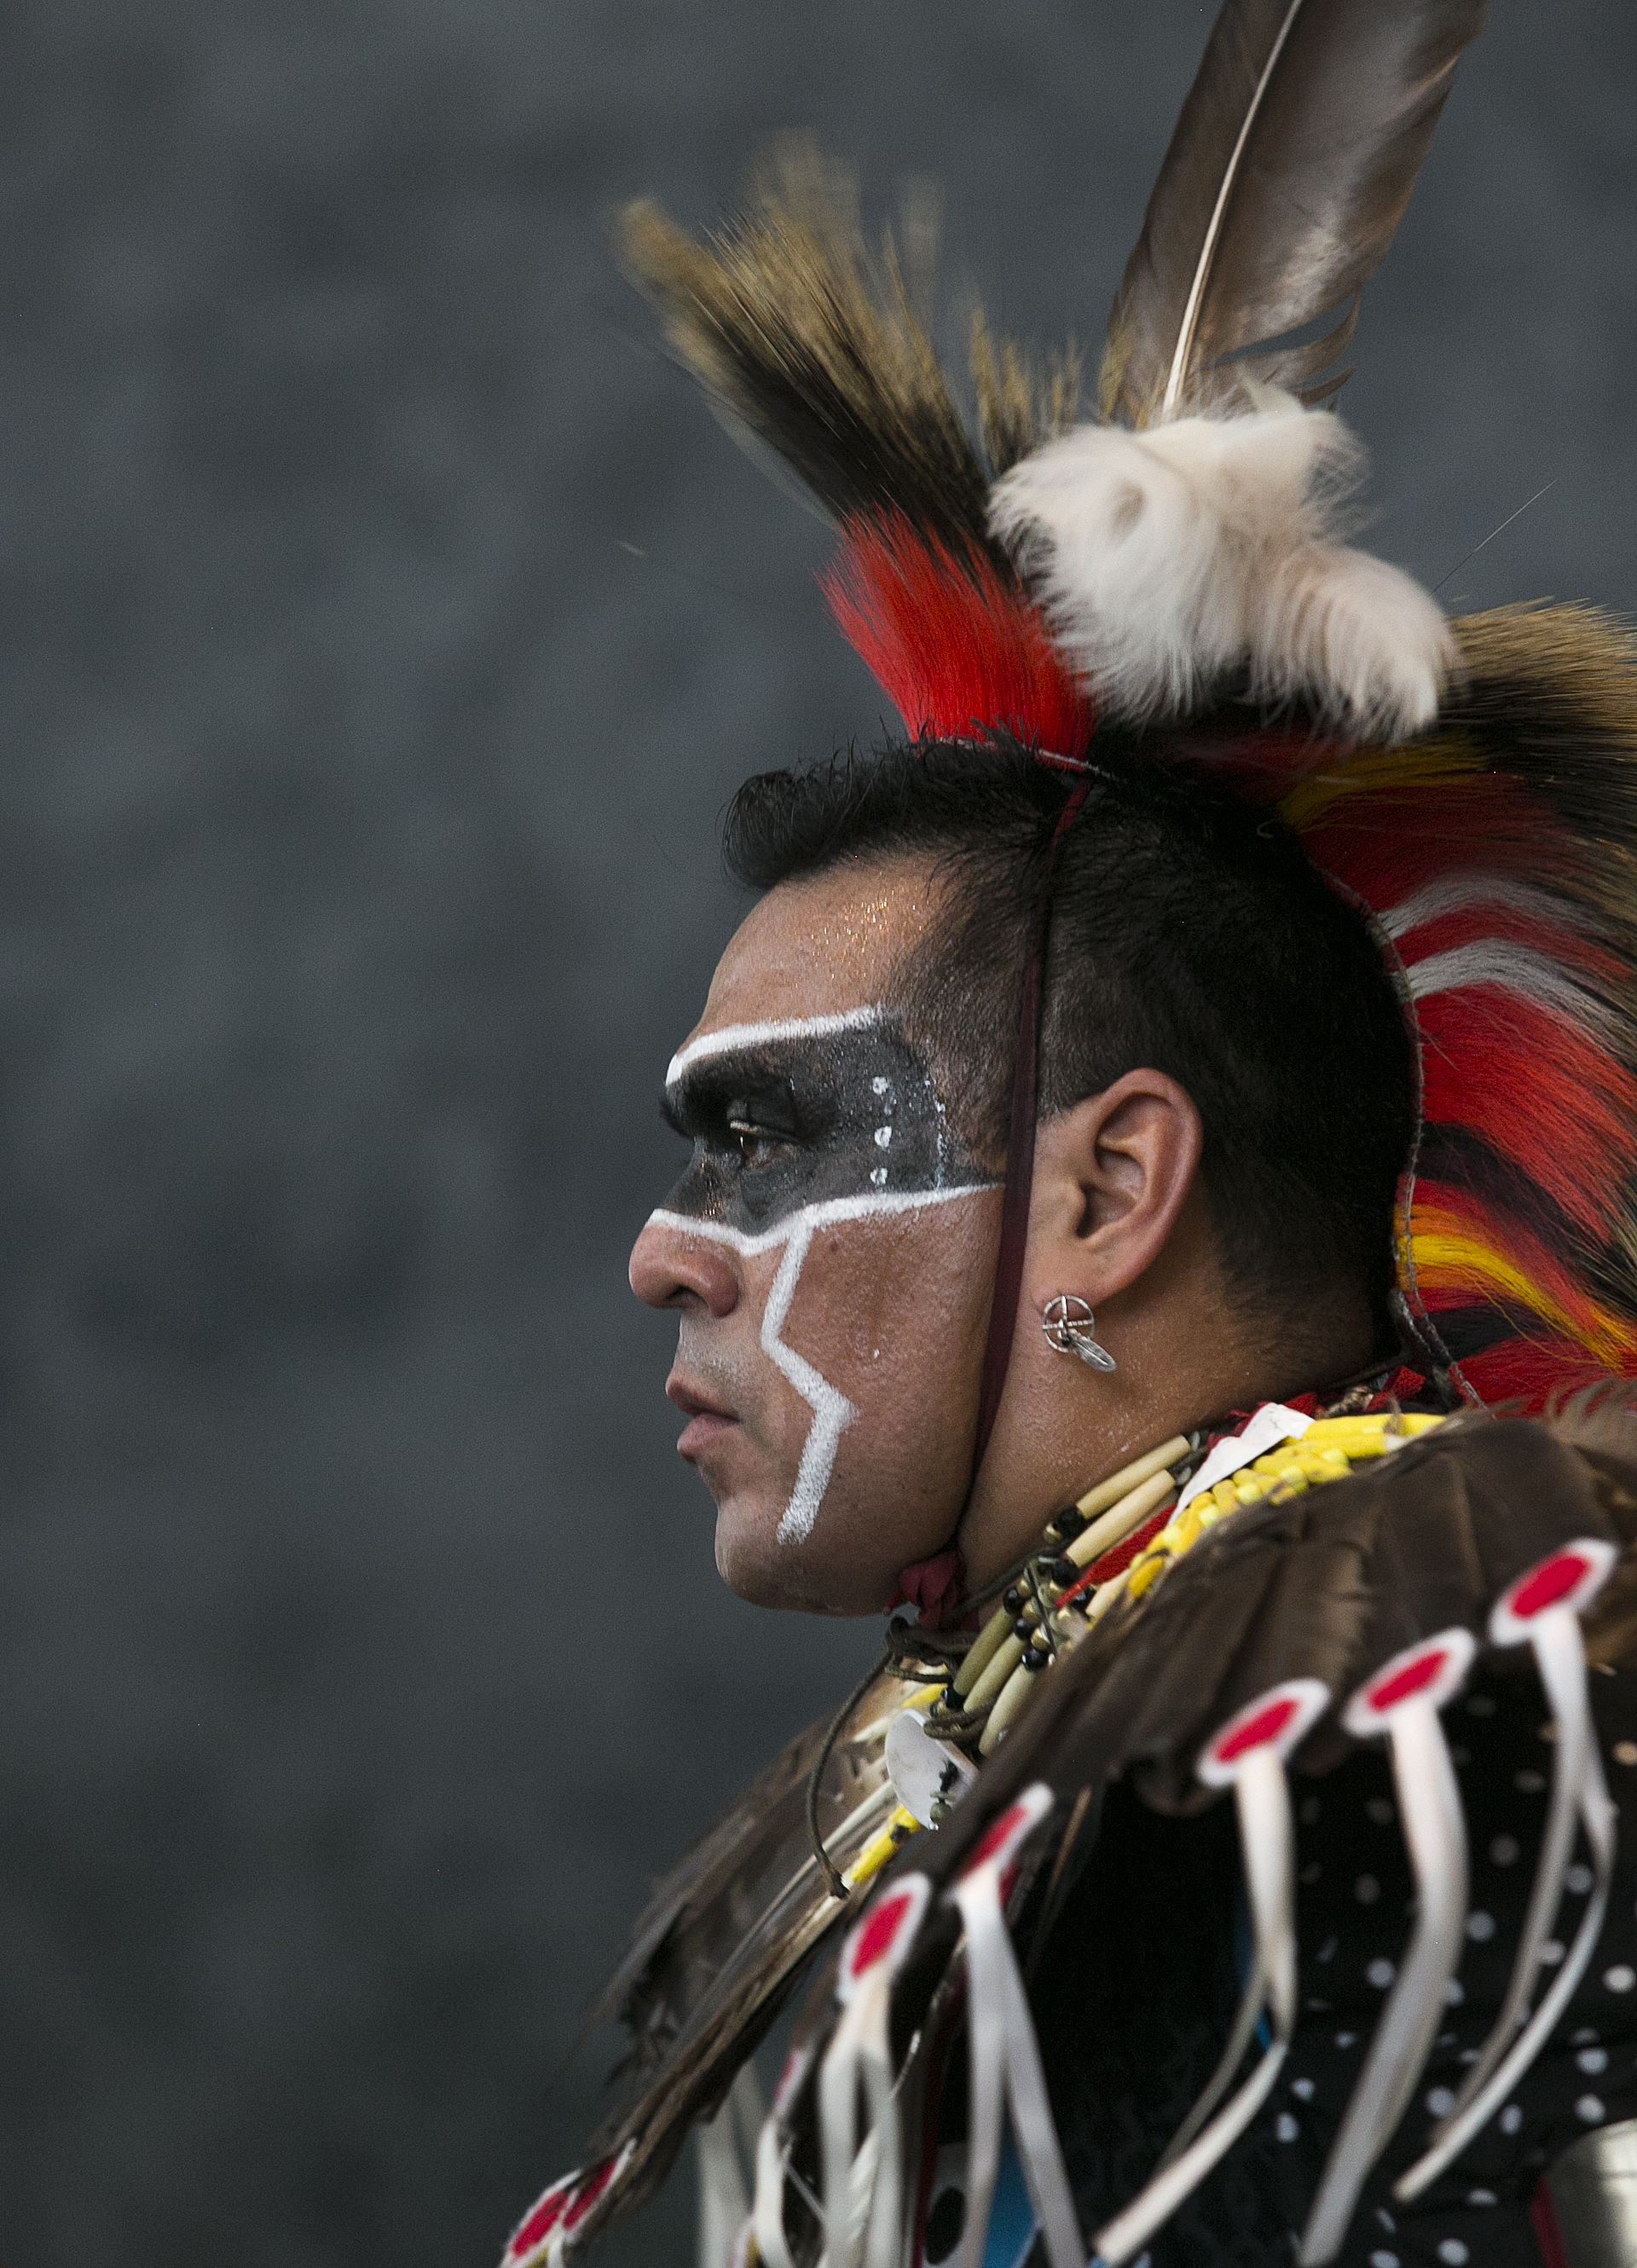  Raul Figueroa participates in an intertribal dance Saturday, April 2 at the CC March Pow wow where intertribal dances were performed for visitors to the 2017 CC Native American Exhibition Powwow. 